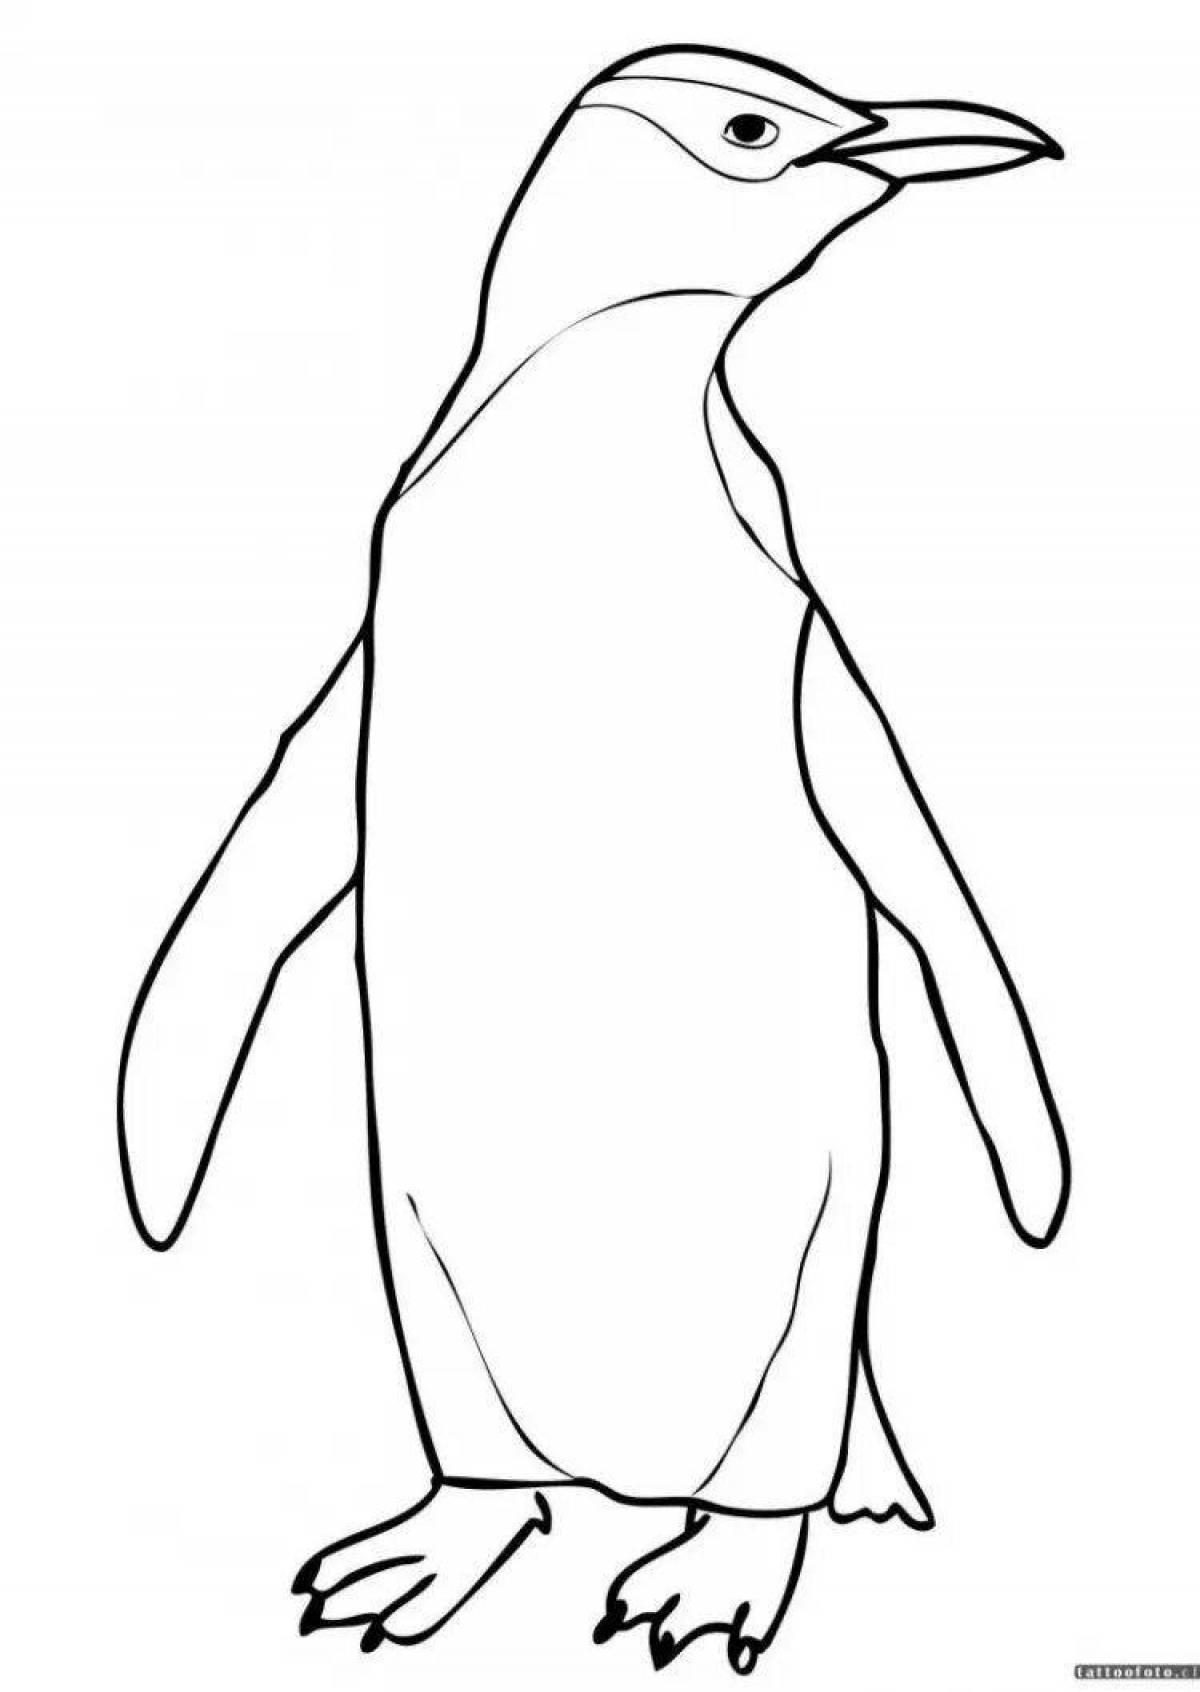 Awesome emperor penguin coloring page